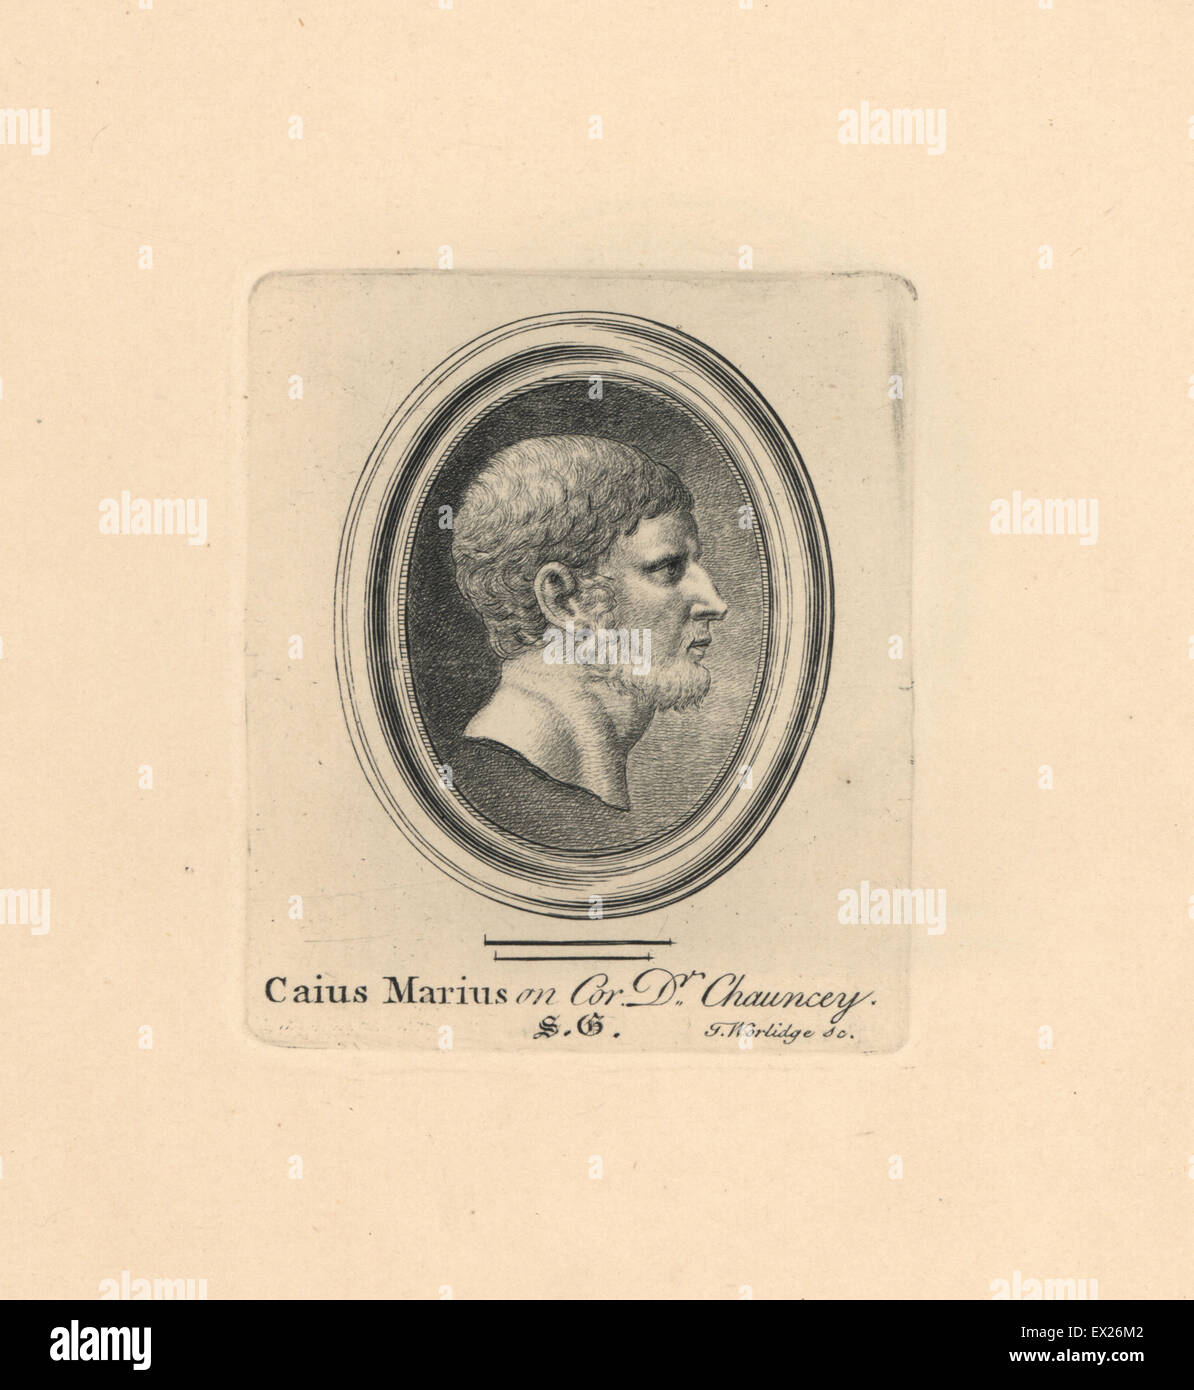 Portrait of Caius Marius, Roman general and statesman, engraved on cornelian from the collection of Dr. Chauncey. Copperplate engraving by Thomas Worlidge from James Vallentin's One Hundred and Eight Engravings from Antique Gems, 1863. Stock Photo